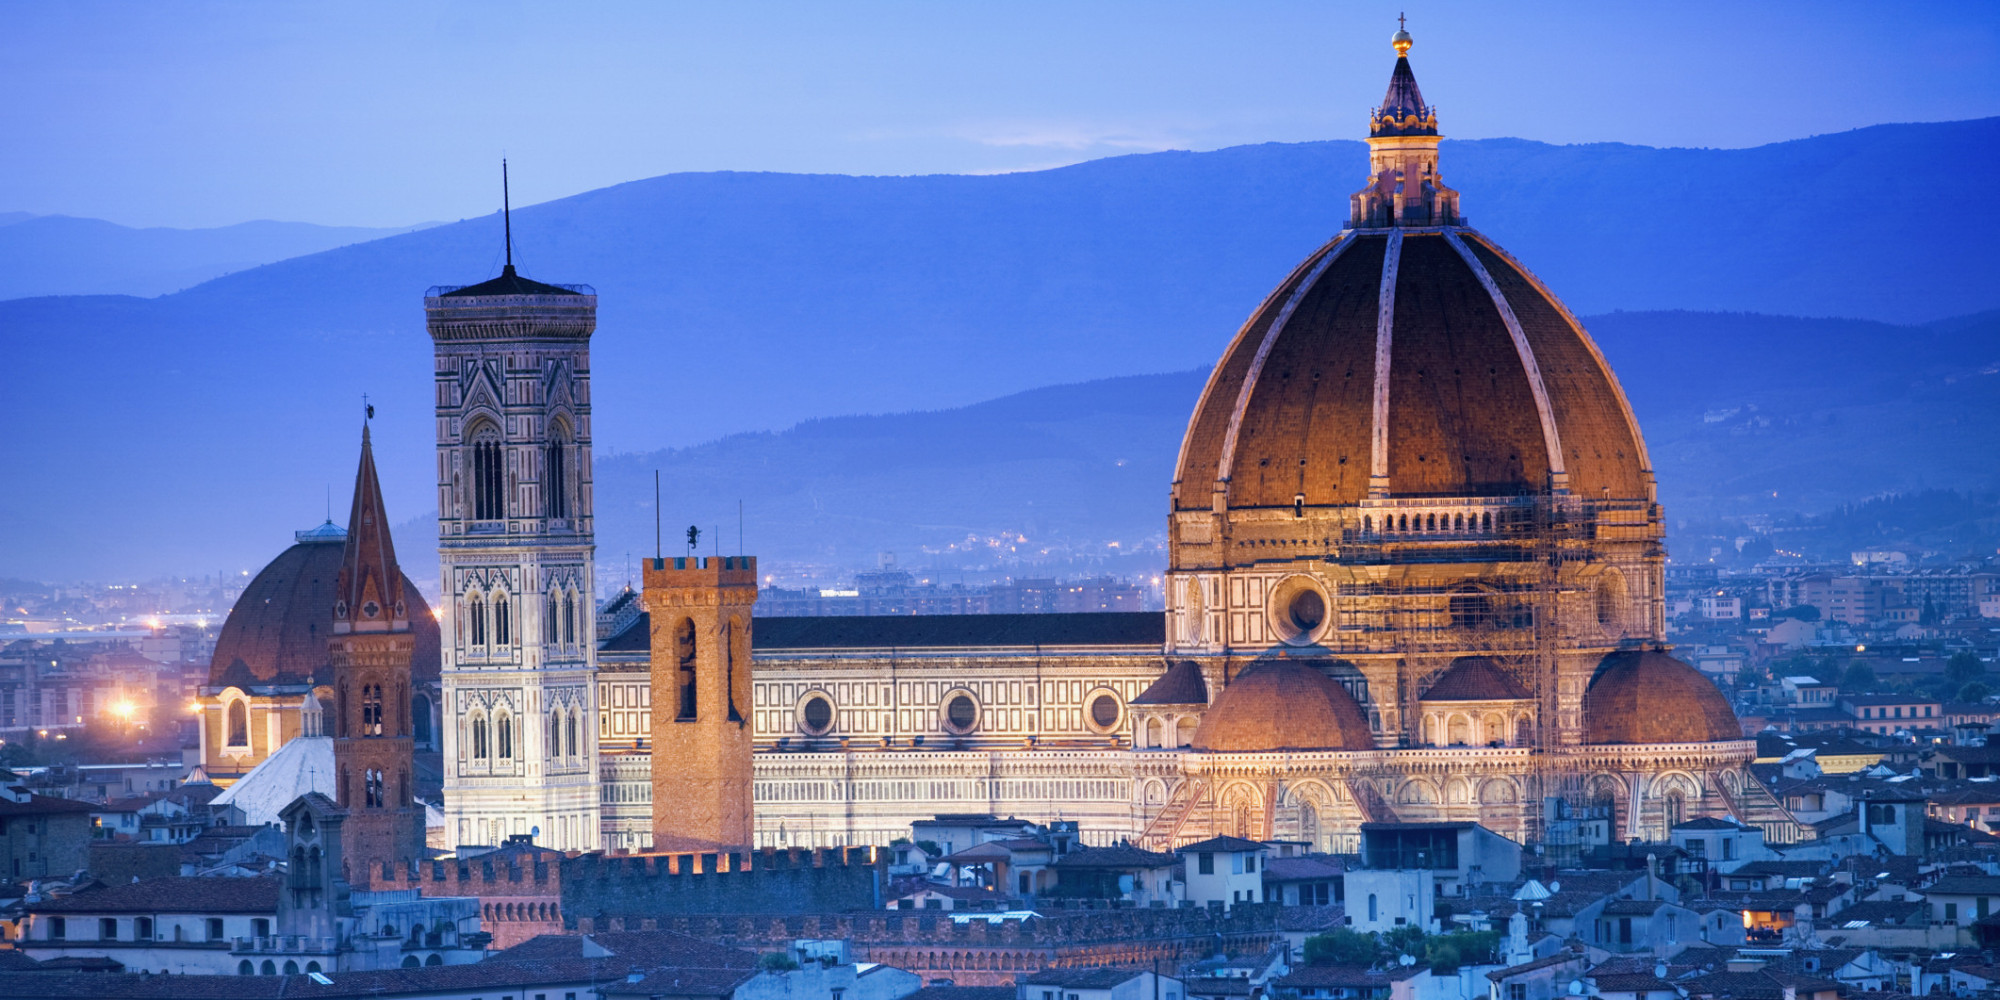 Florence travel guide for first-time visitors - Best Places to Visit in Europe - planningforeurope.com